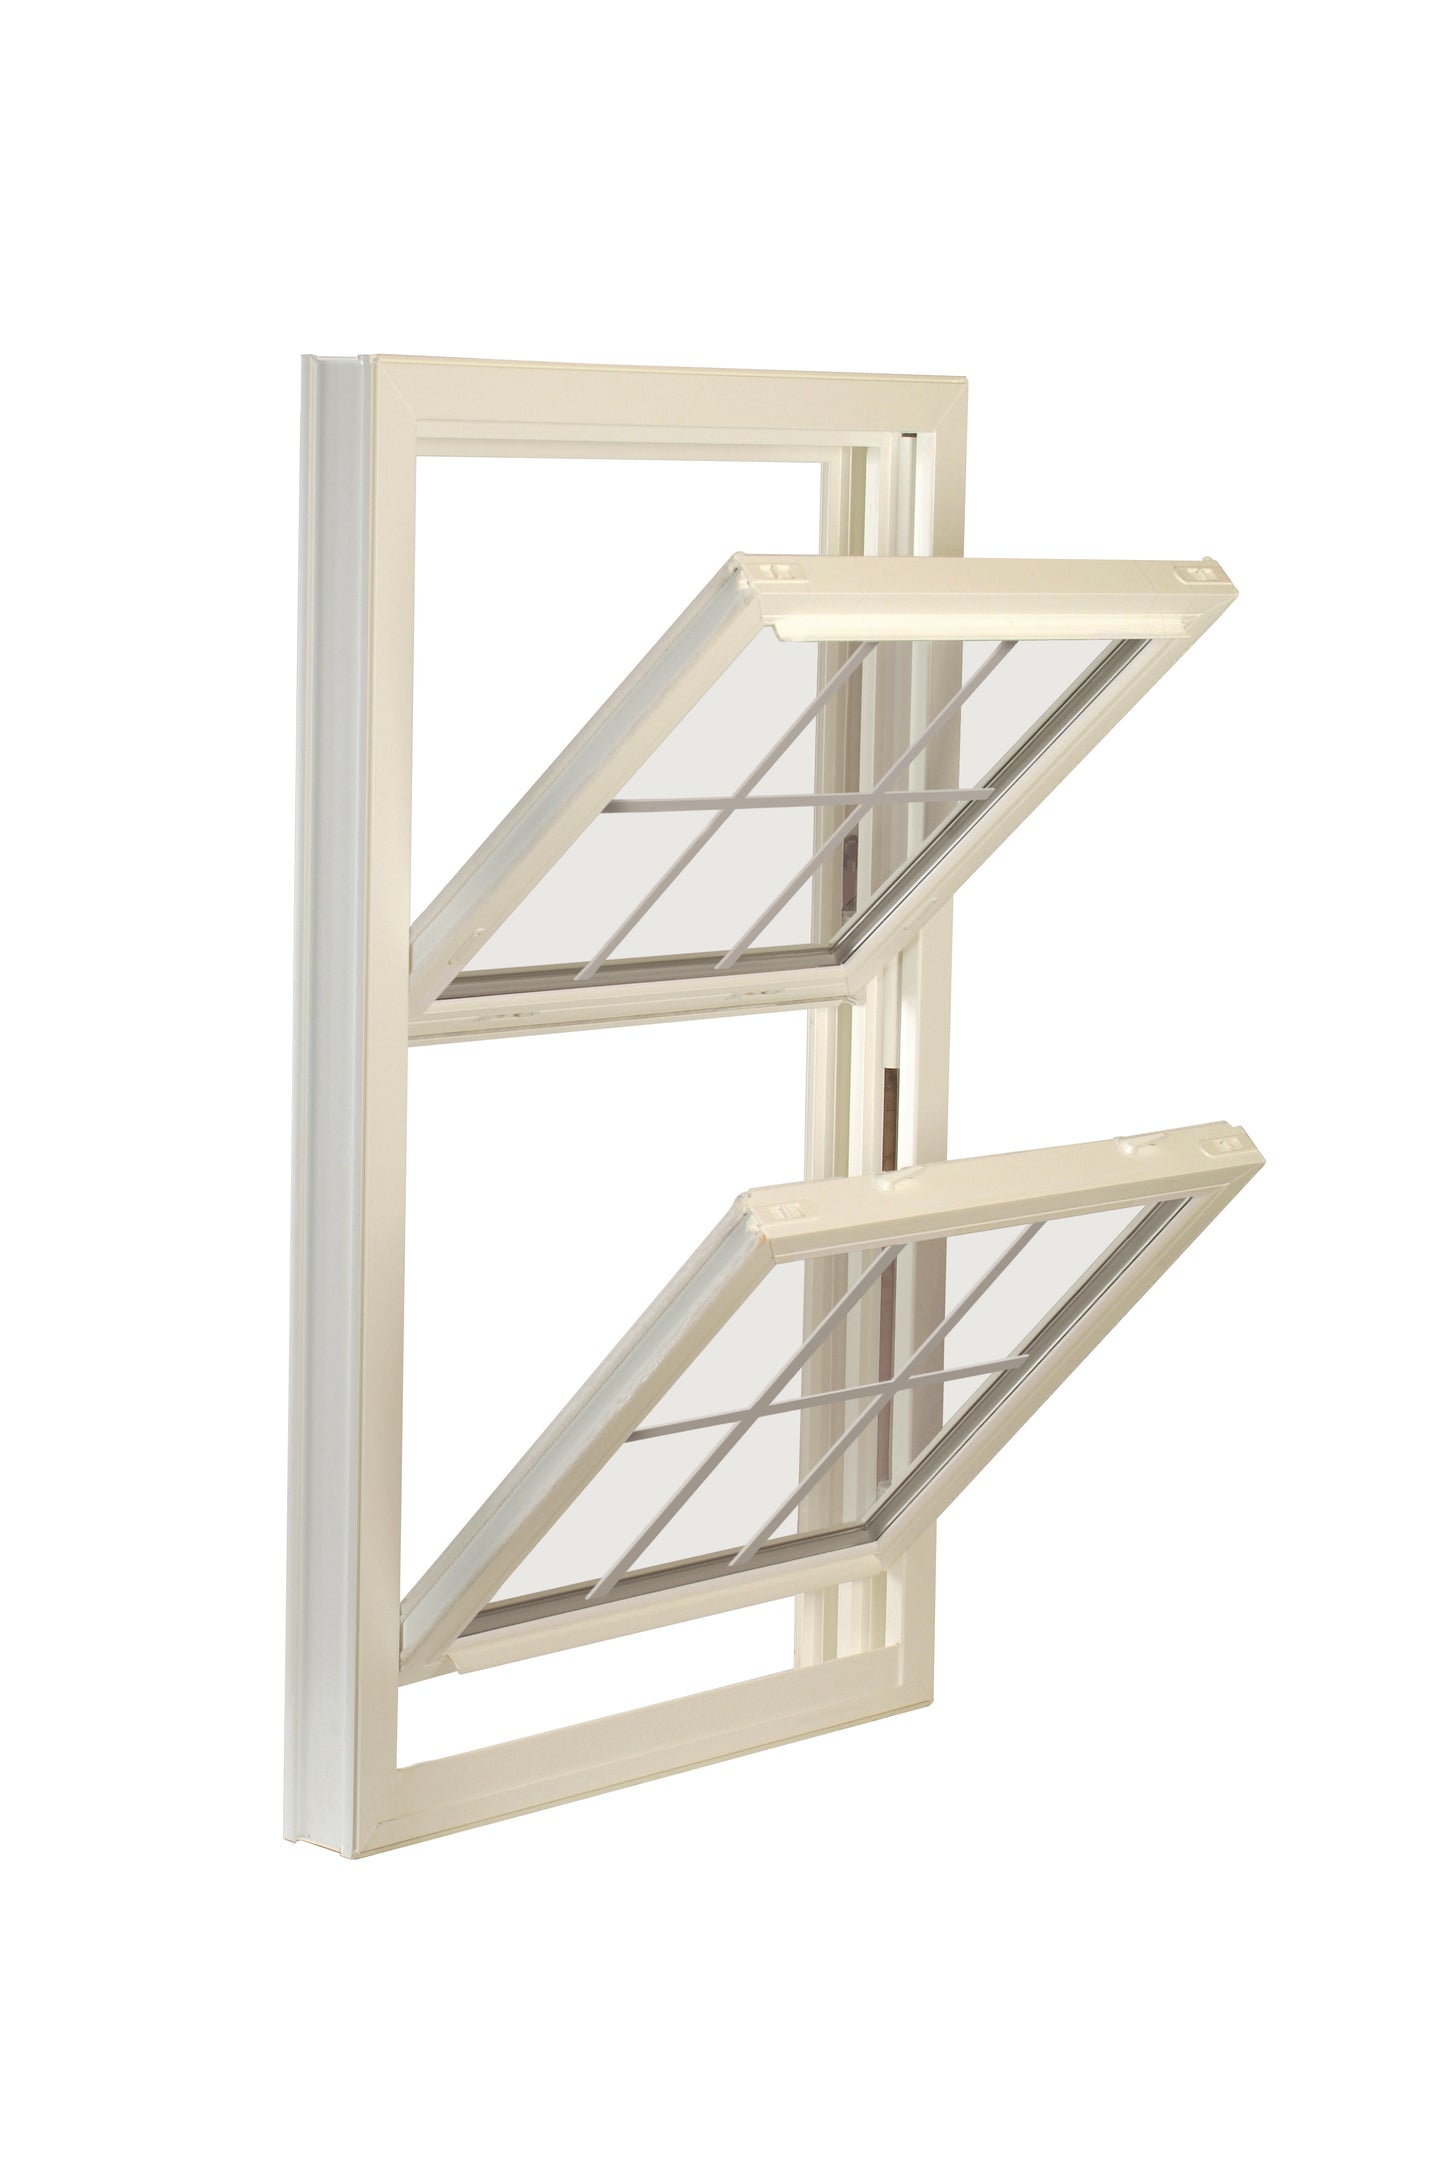 Imperial Elite Double Hung, size 36 inch width X 36 inch height